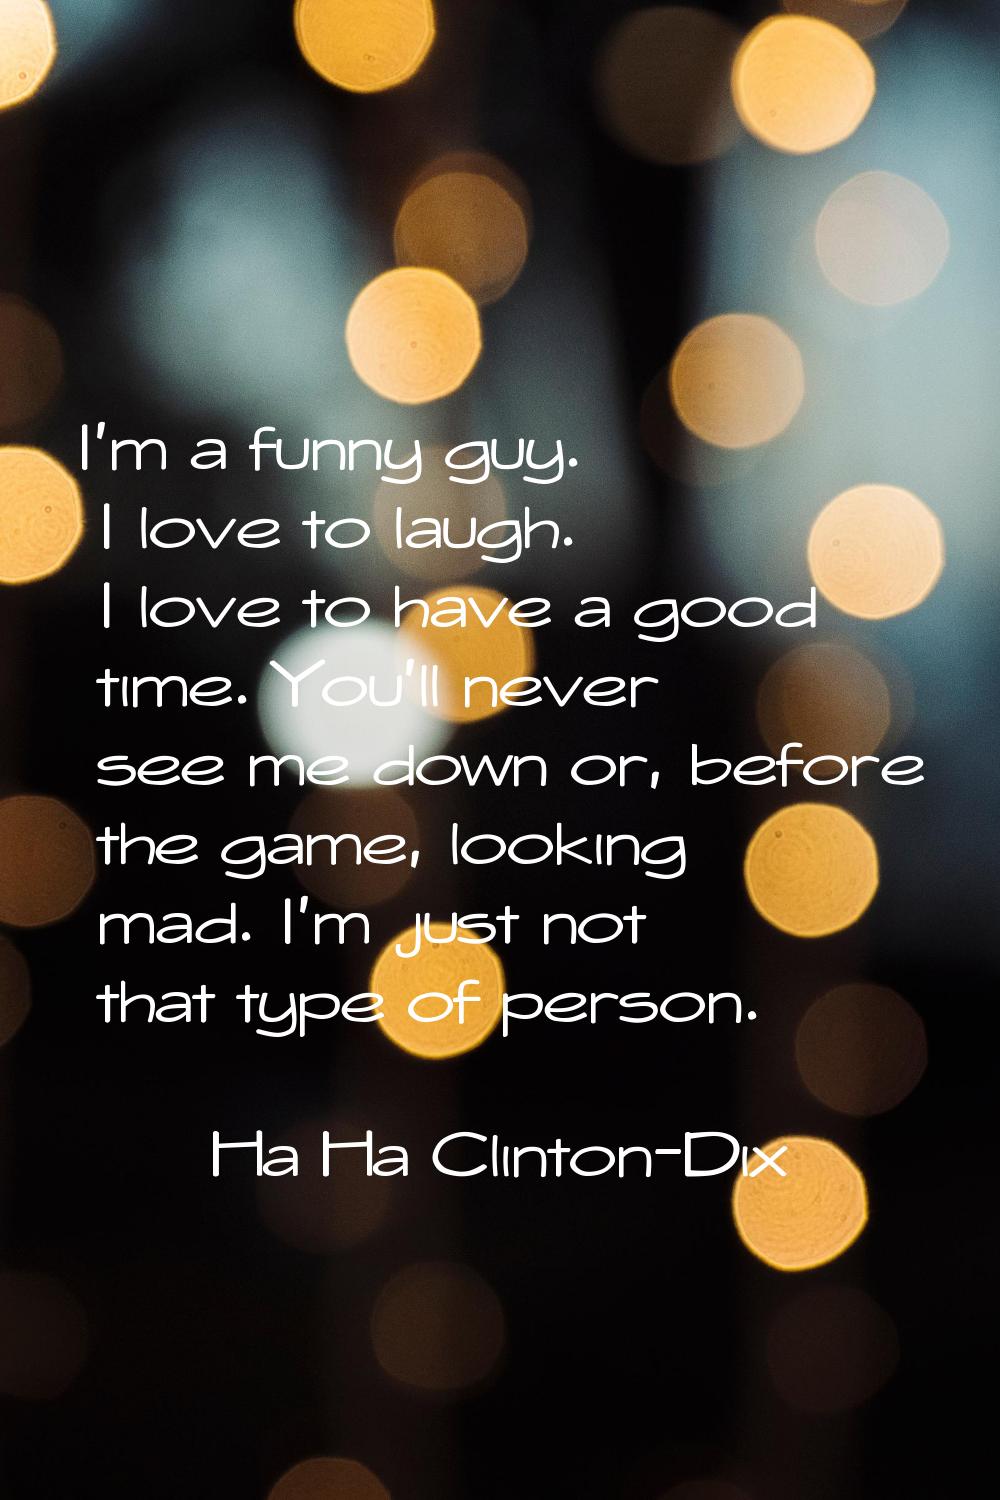 I'm a funny guy. I love to laugh. I love to have a good time. You'll never see me down or, before t